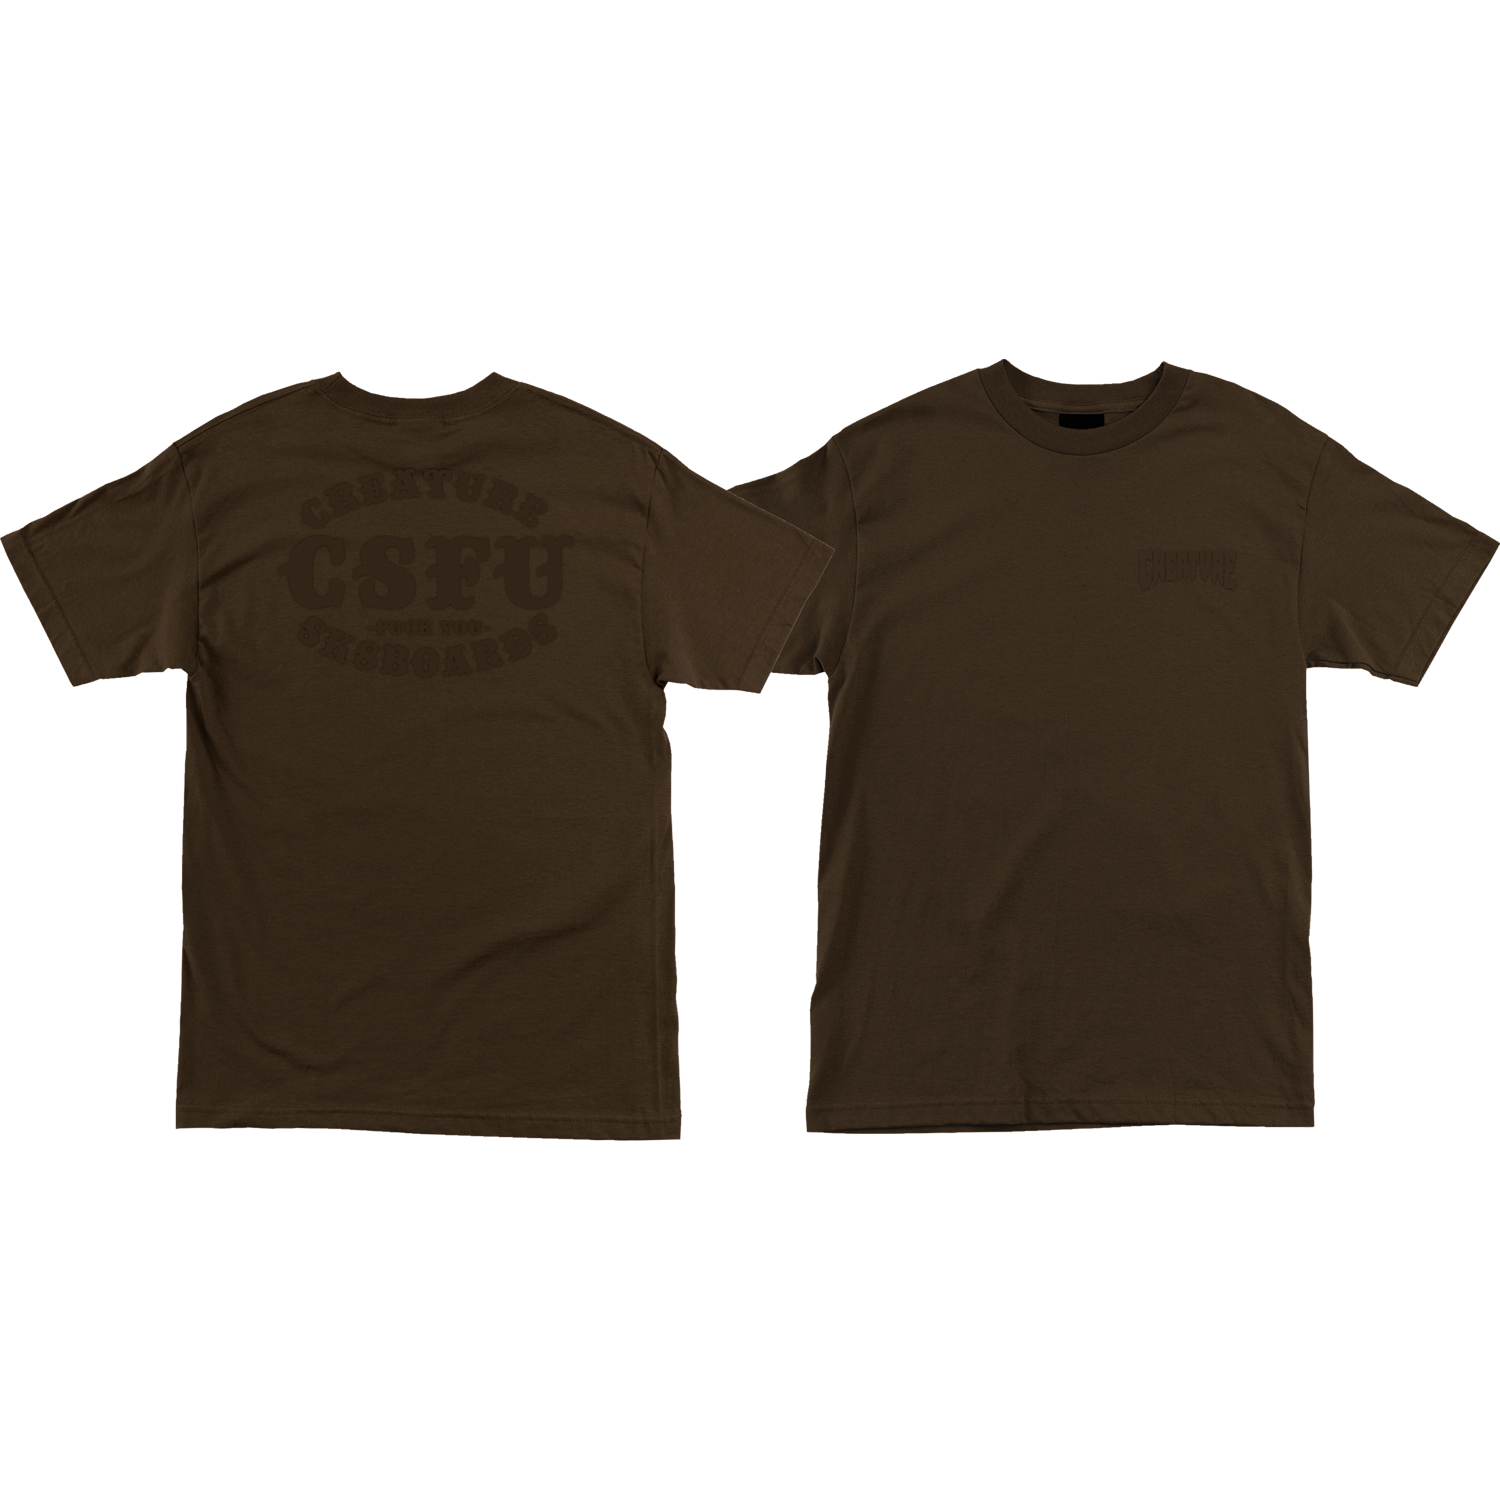 Creature Club Support T-Shirt - Size: SMALL Dark Chocolate